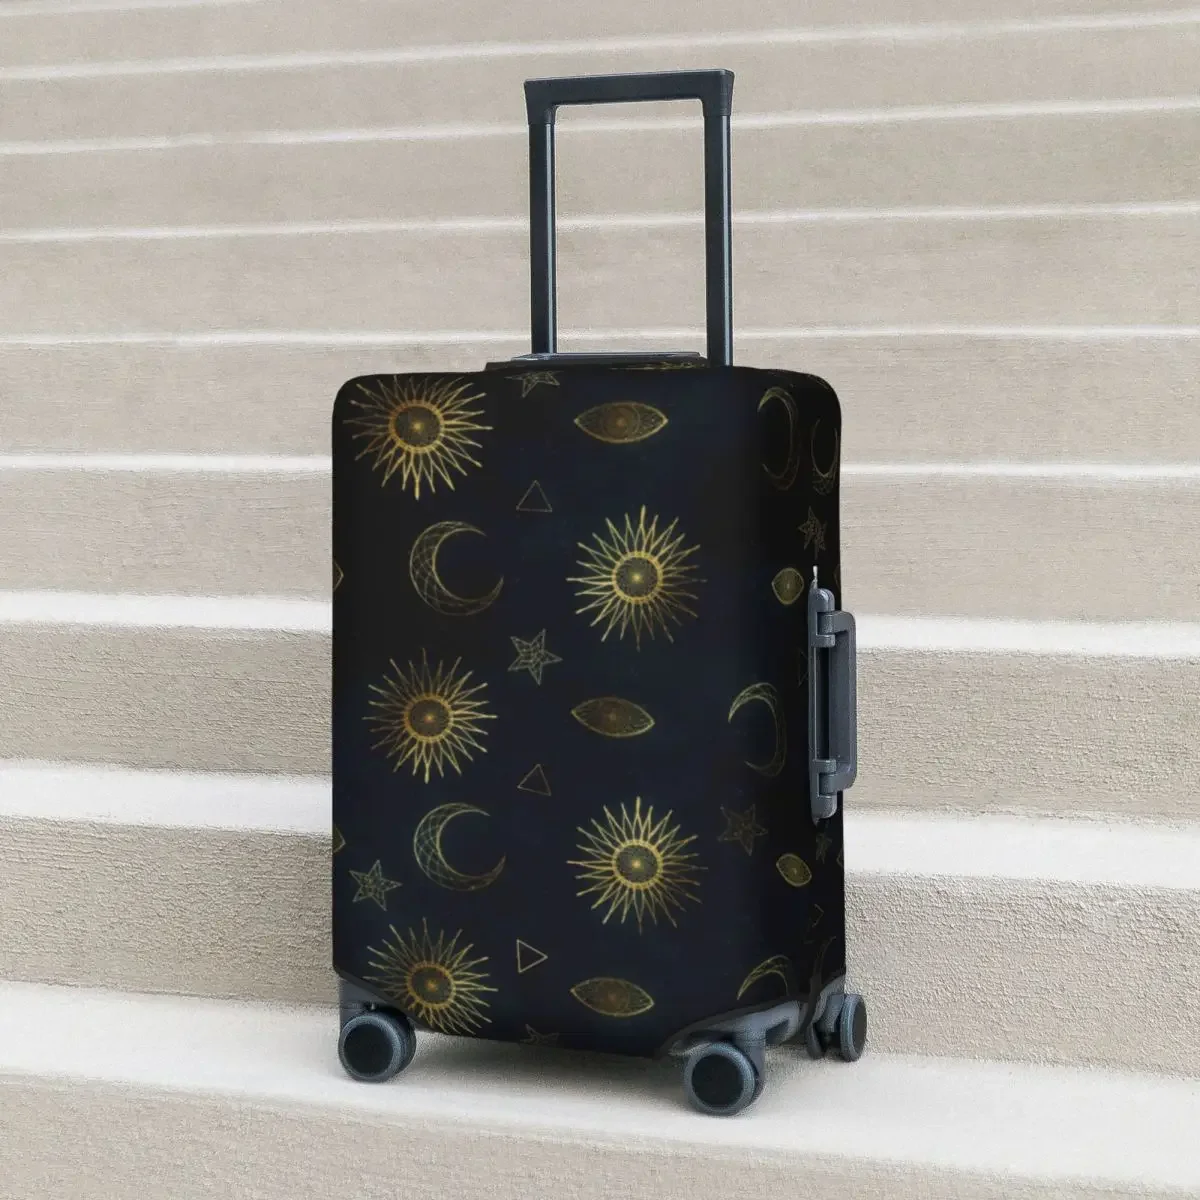 

Magical Symbol Suitcase Cover Gold Moon Sun Stars Fun Travel Protection Luggage Supplies Holiday